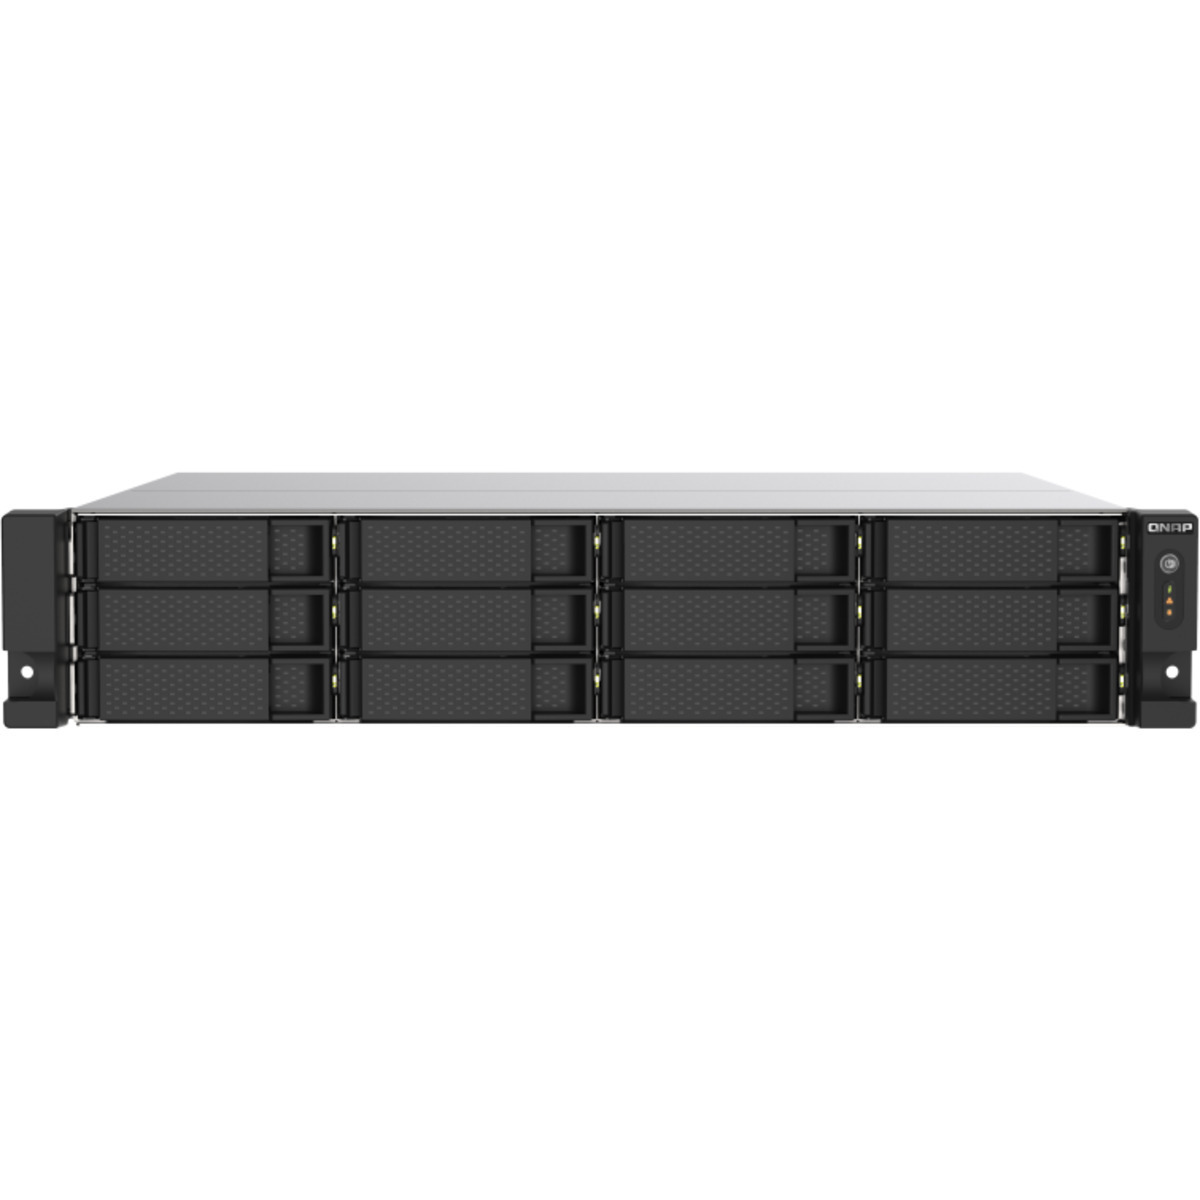 QNAP TS-1273AU-RP 264tb 12-Bay RackMount Multimedia / Power User / Business NAS - Network Attached Storage Device 12x22tb Western Digital Ultrastar HC570 WUH722222ALE6L4 3.5 7200rpm SATA 6Gb/s HDD ENTERPRISE Class Drives Installed - Burn-In Tested - FREE RAM UPGRADE TS-1273AU-RP